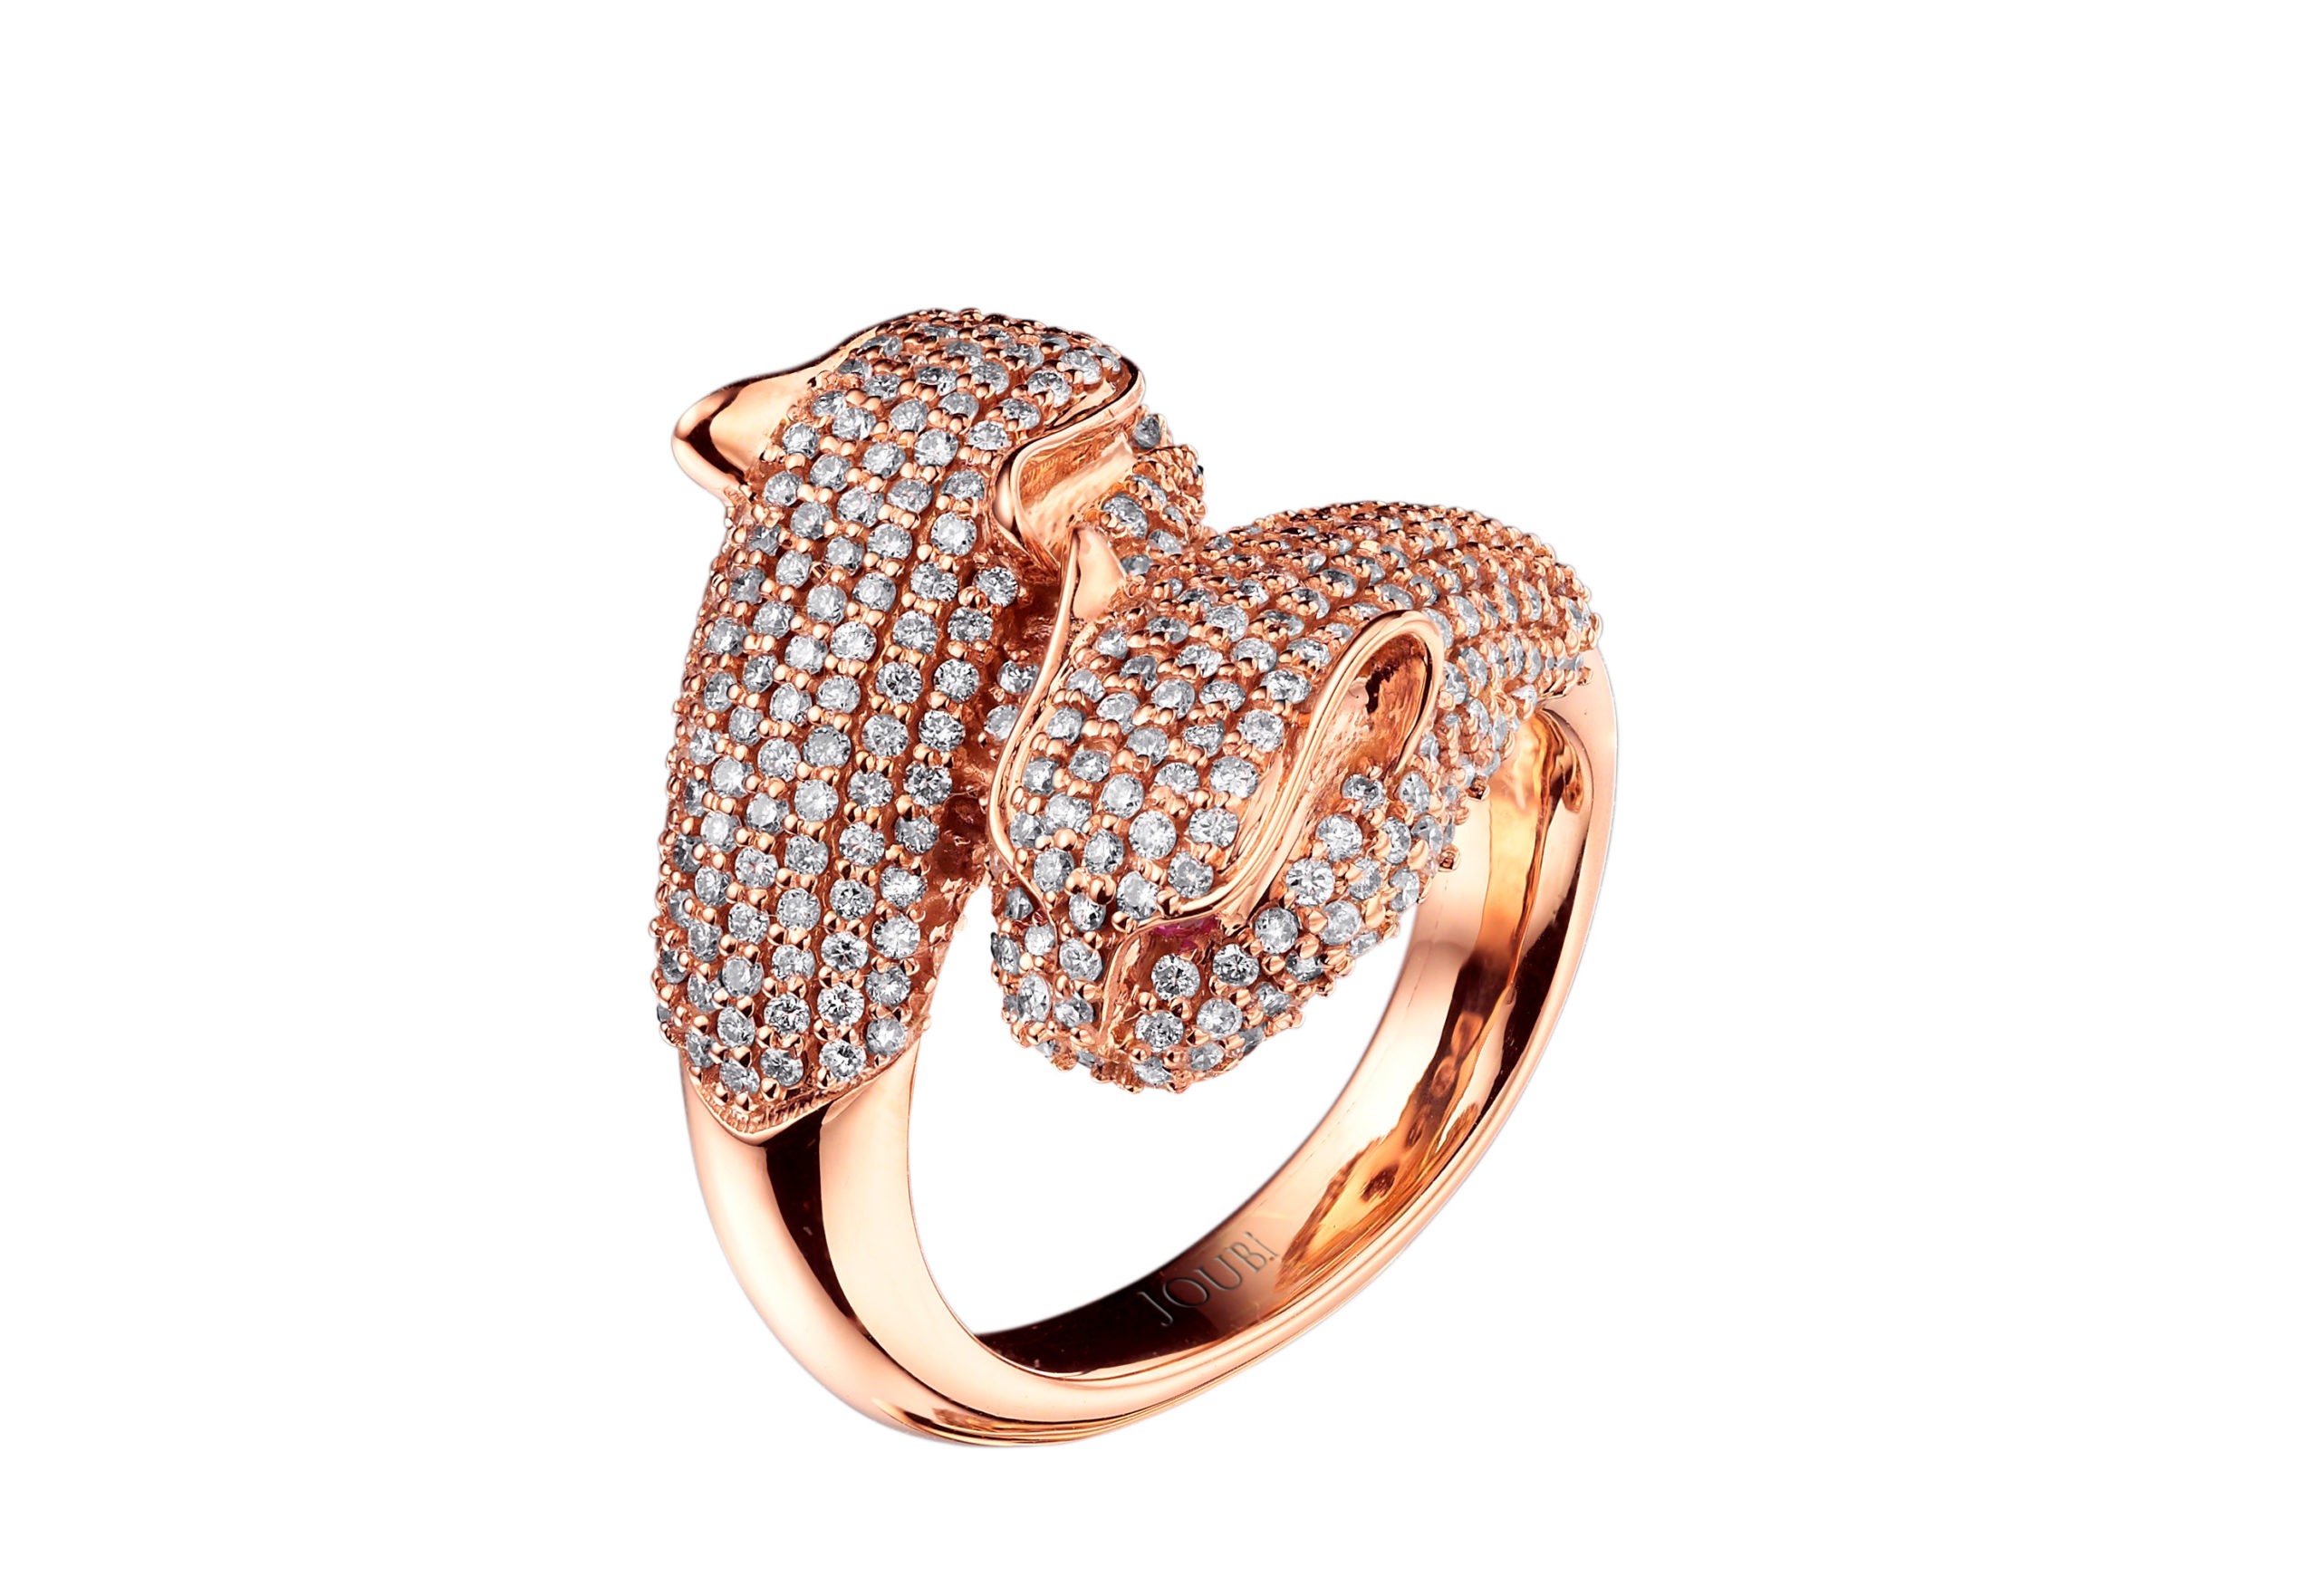 Christmas sparklers: our pick of engagement rings